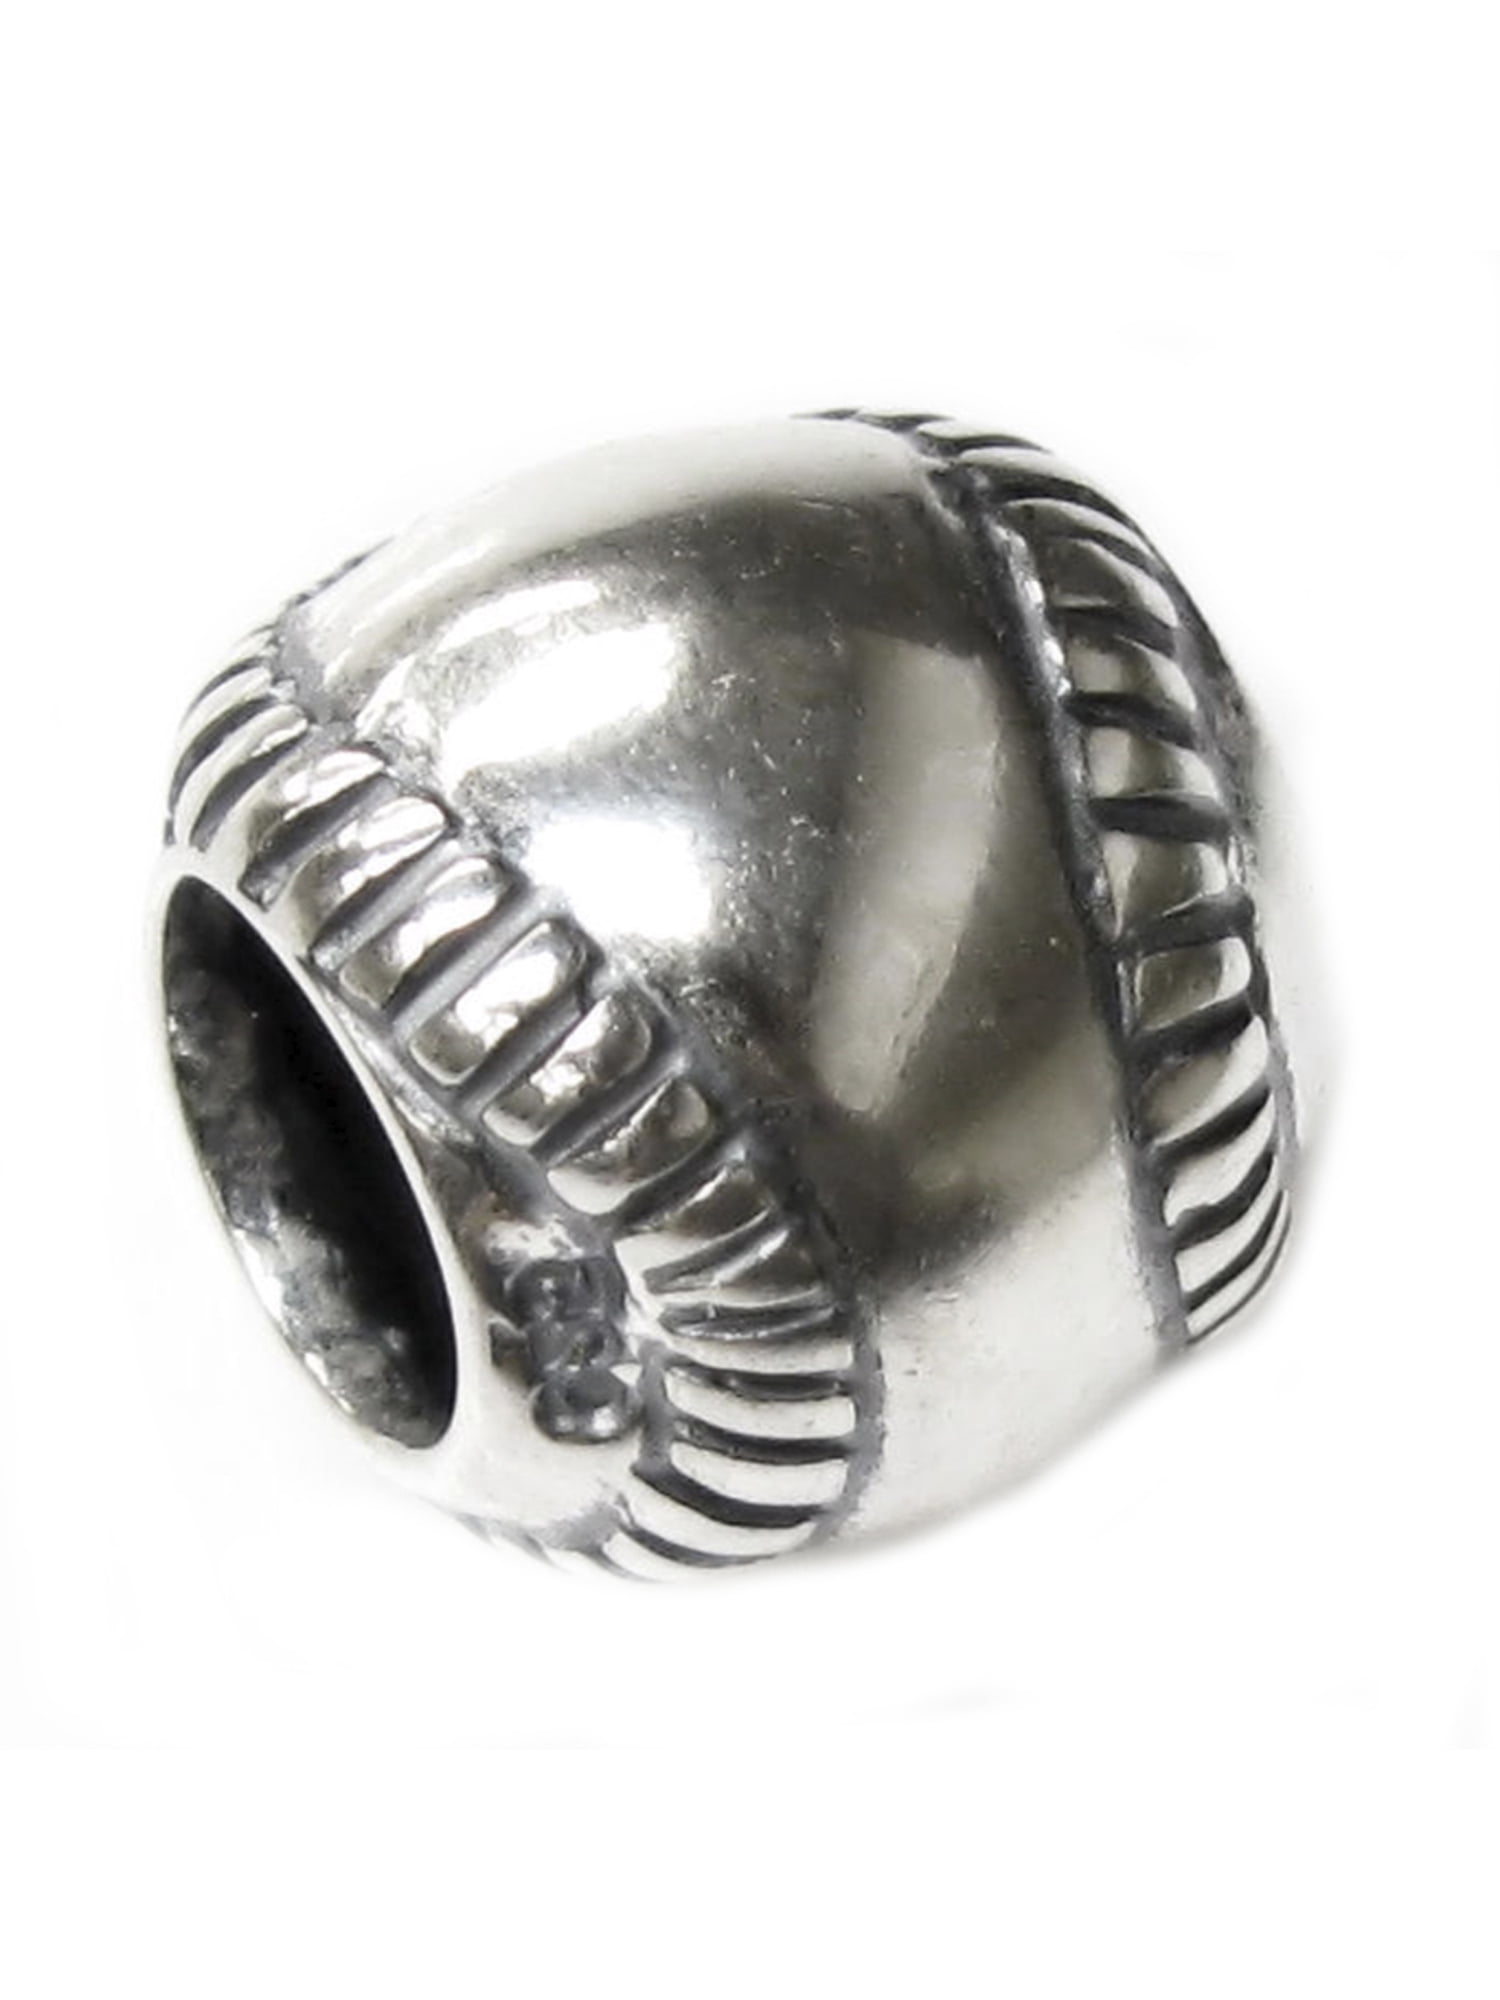 Solid 925 Sterling Silver Baseball Charm Bead